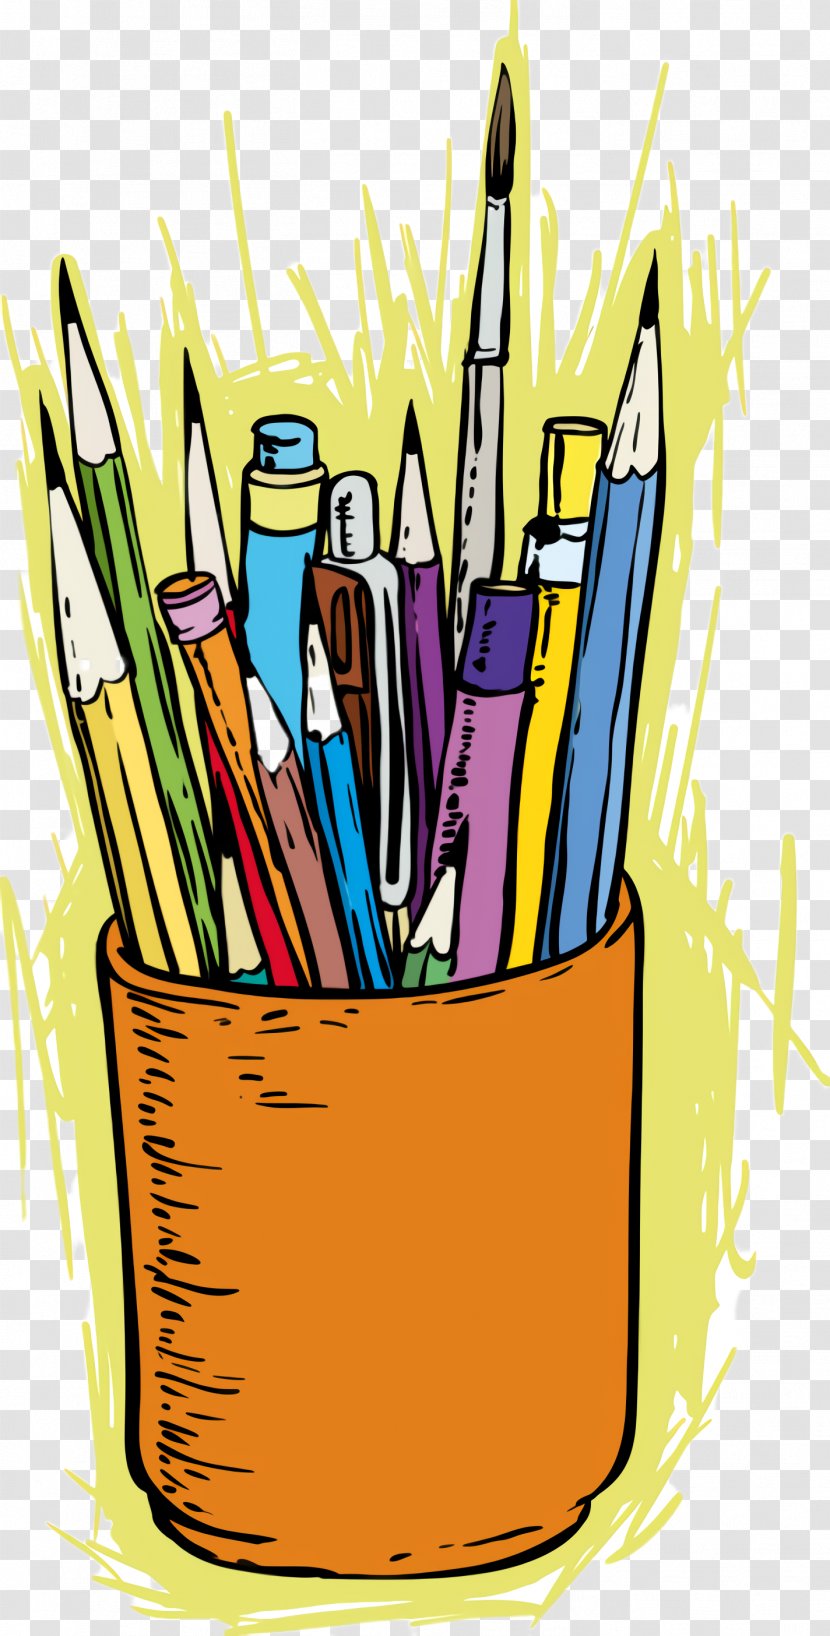 Pencil Writing Implement Clip Art Graphic Design Stationery - Office Supplies Transparent PNG